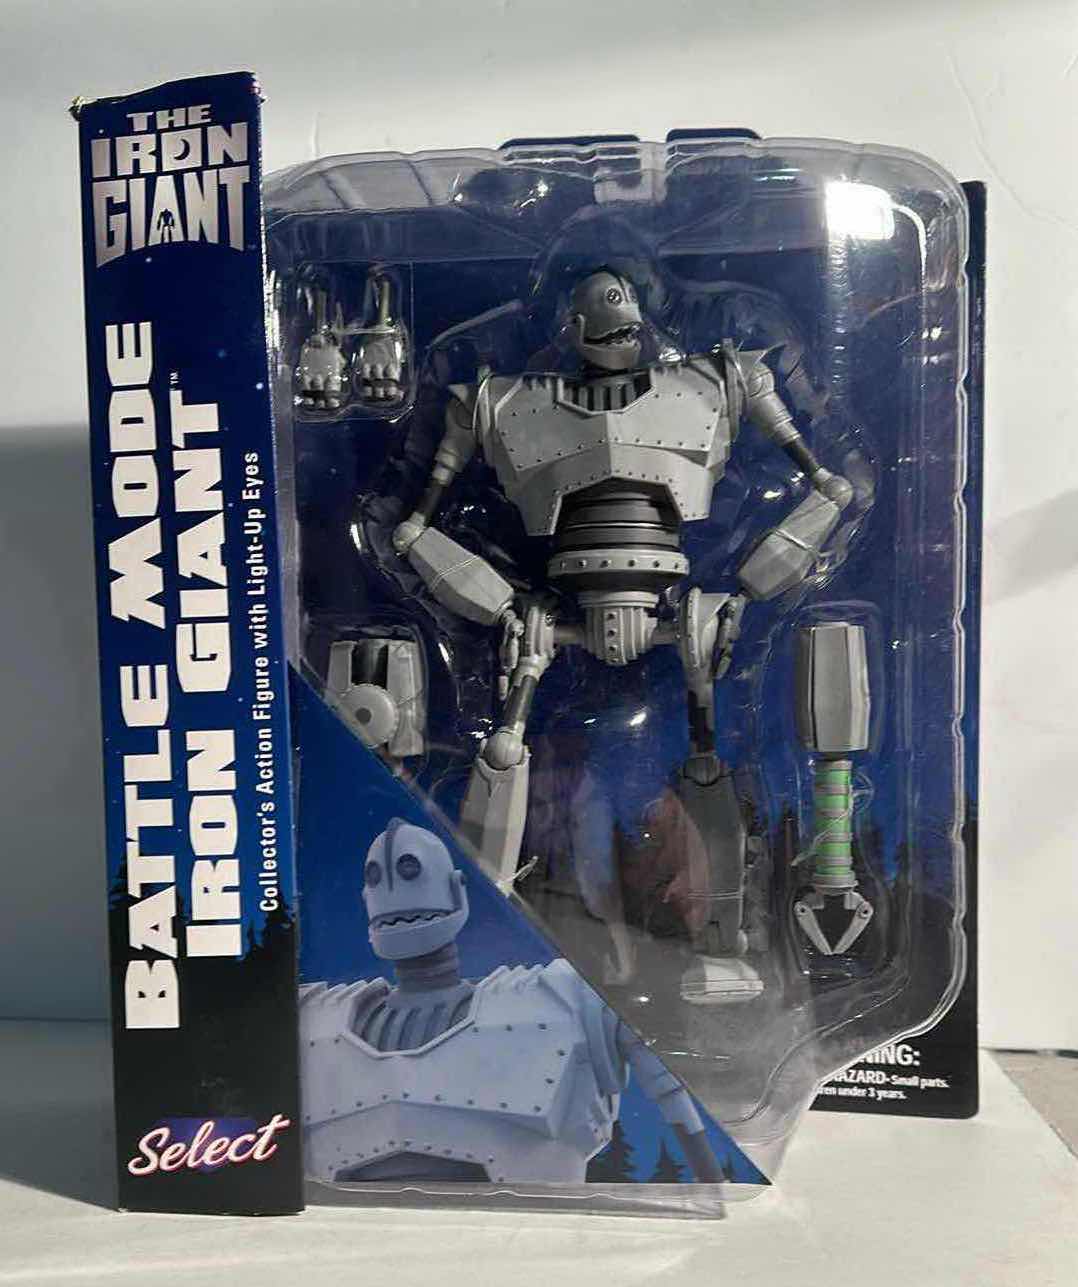 Photo 1 of THE IRON GIANT SELECTION “BATTLE MODE” COLLECTOR’S ACTION FIGURE -RETAIL PRICE $32